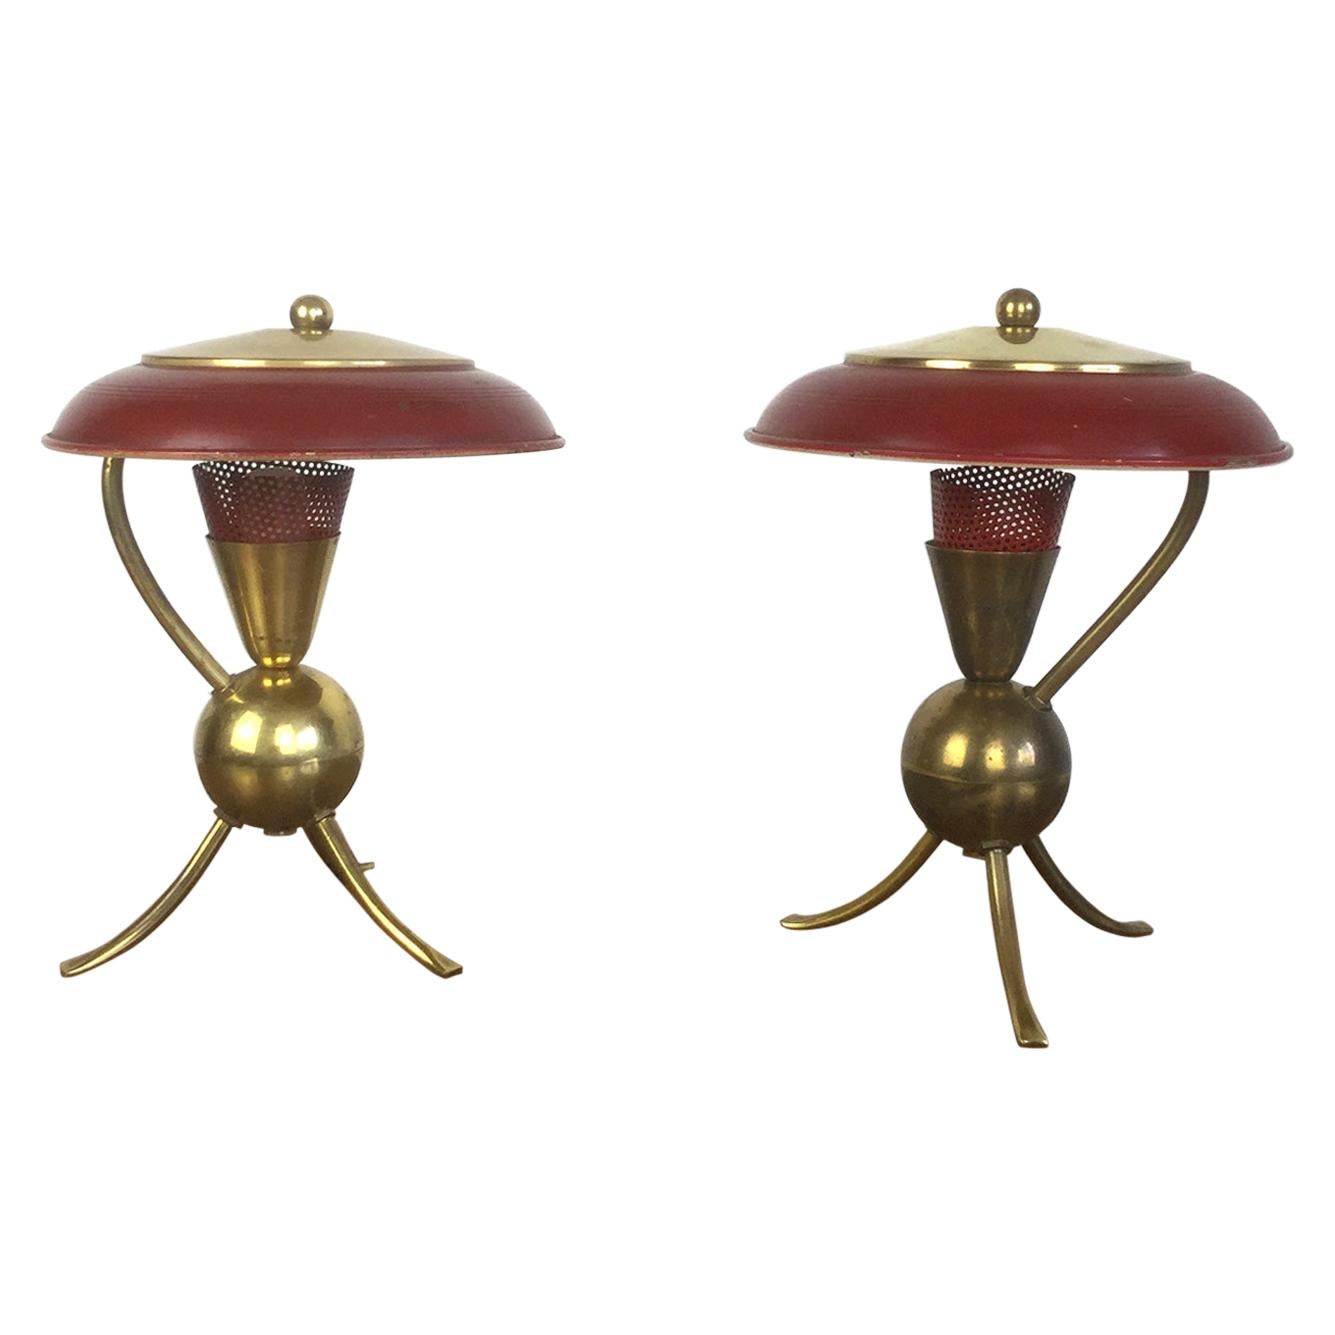 Pair of Red Enamel and Brass Tripod Table Lamp, French, 1950s For Sale